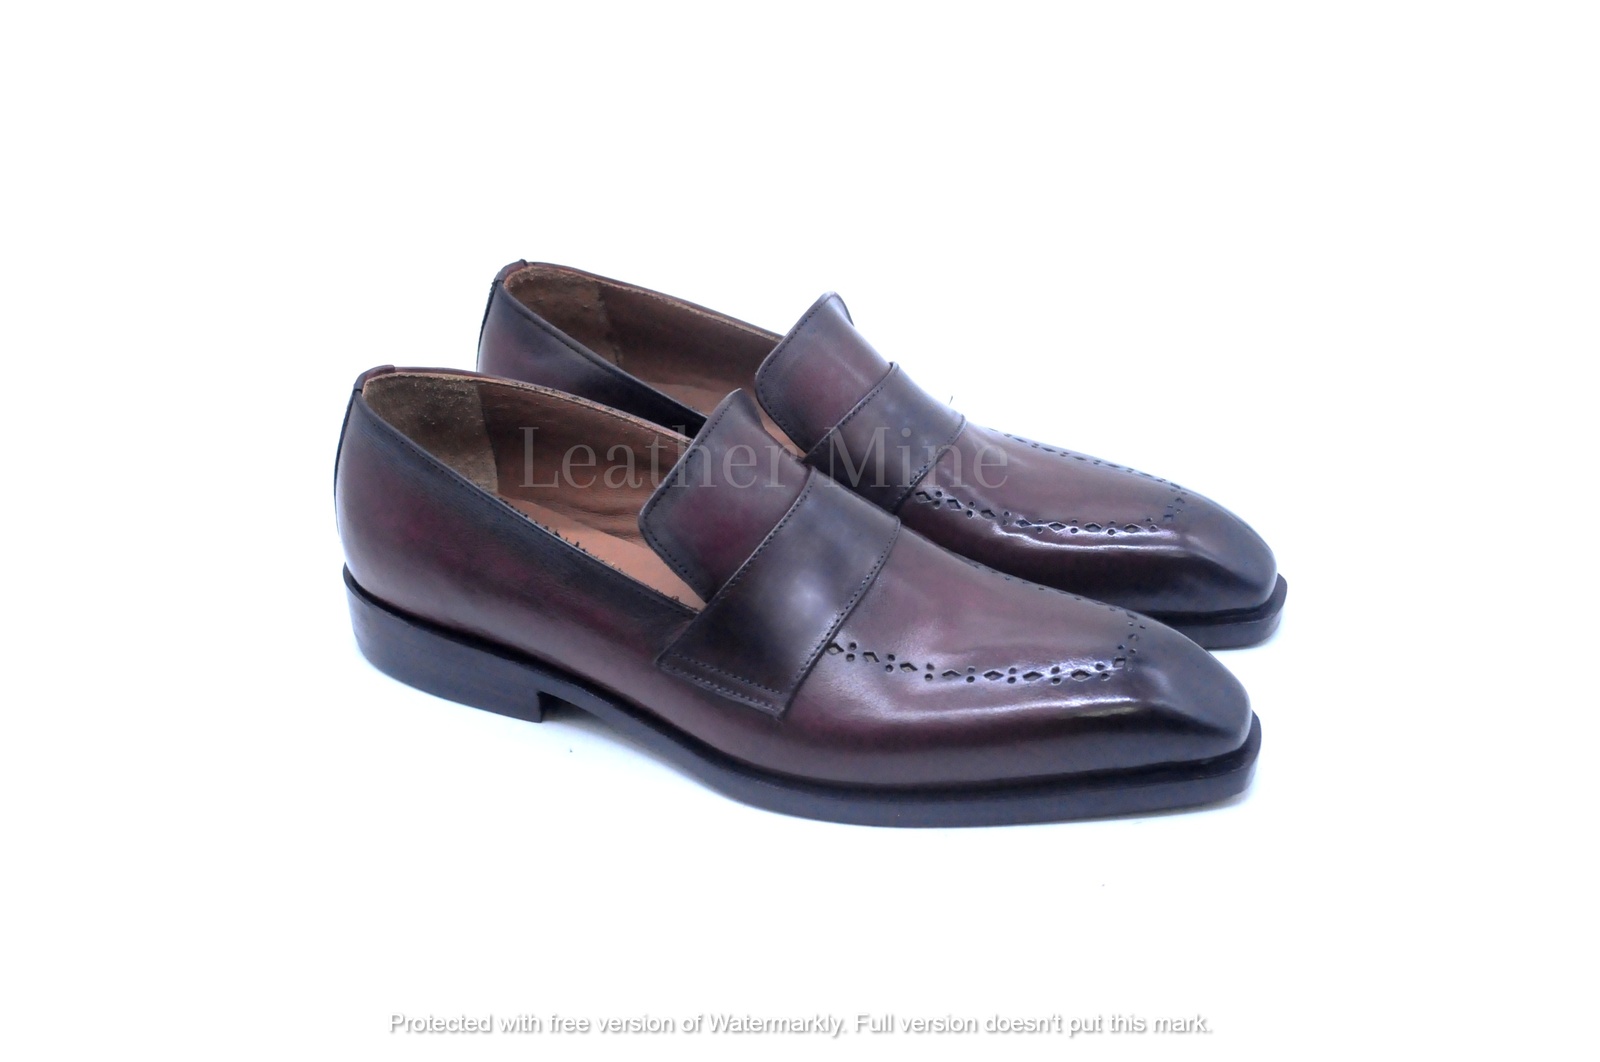 Leather Ox Blood Loafers shoes Men's, Handmade Formal Custom Made Shoes